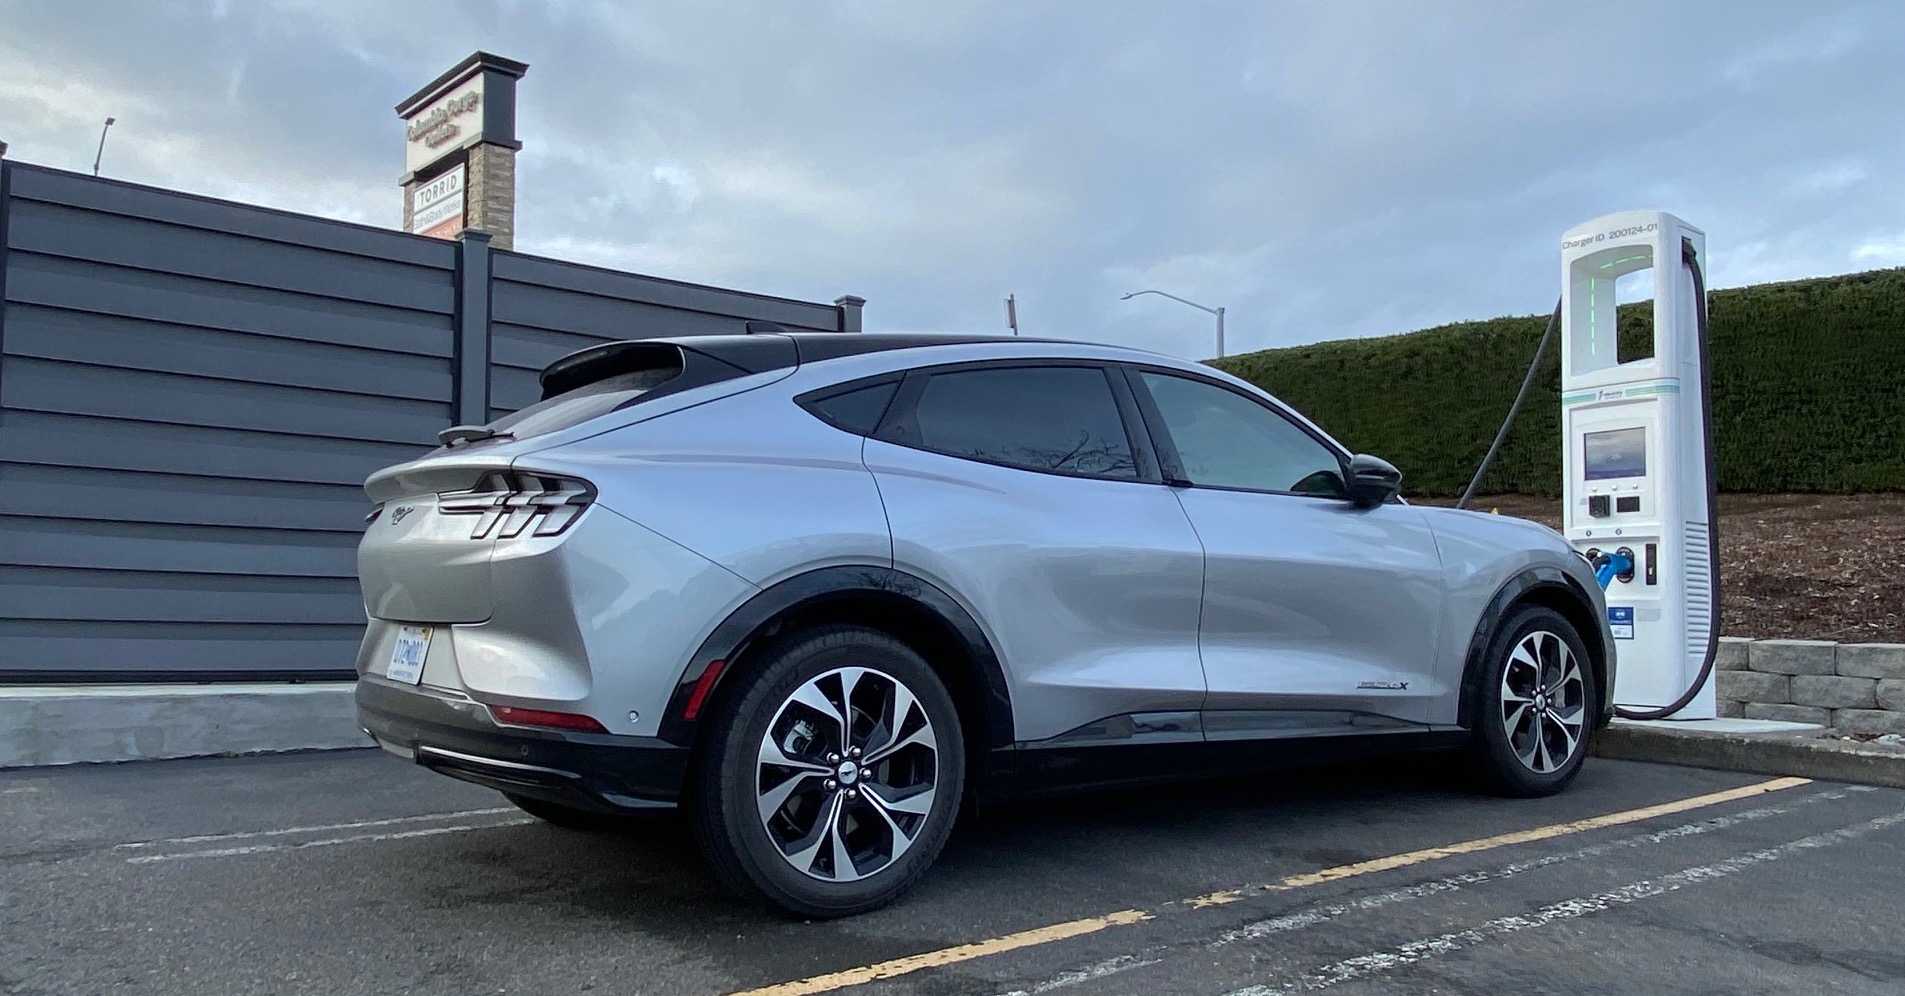 Electrify America tops other EV charging networks in study of user experienceElectrify America tops other EV charging networks in study of user experience